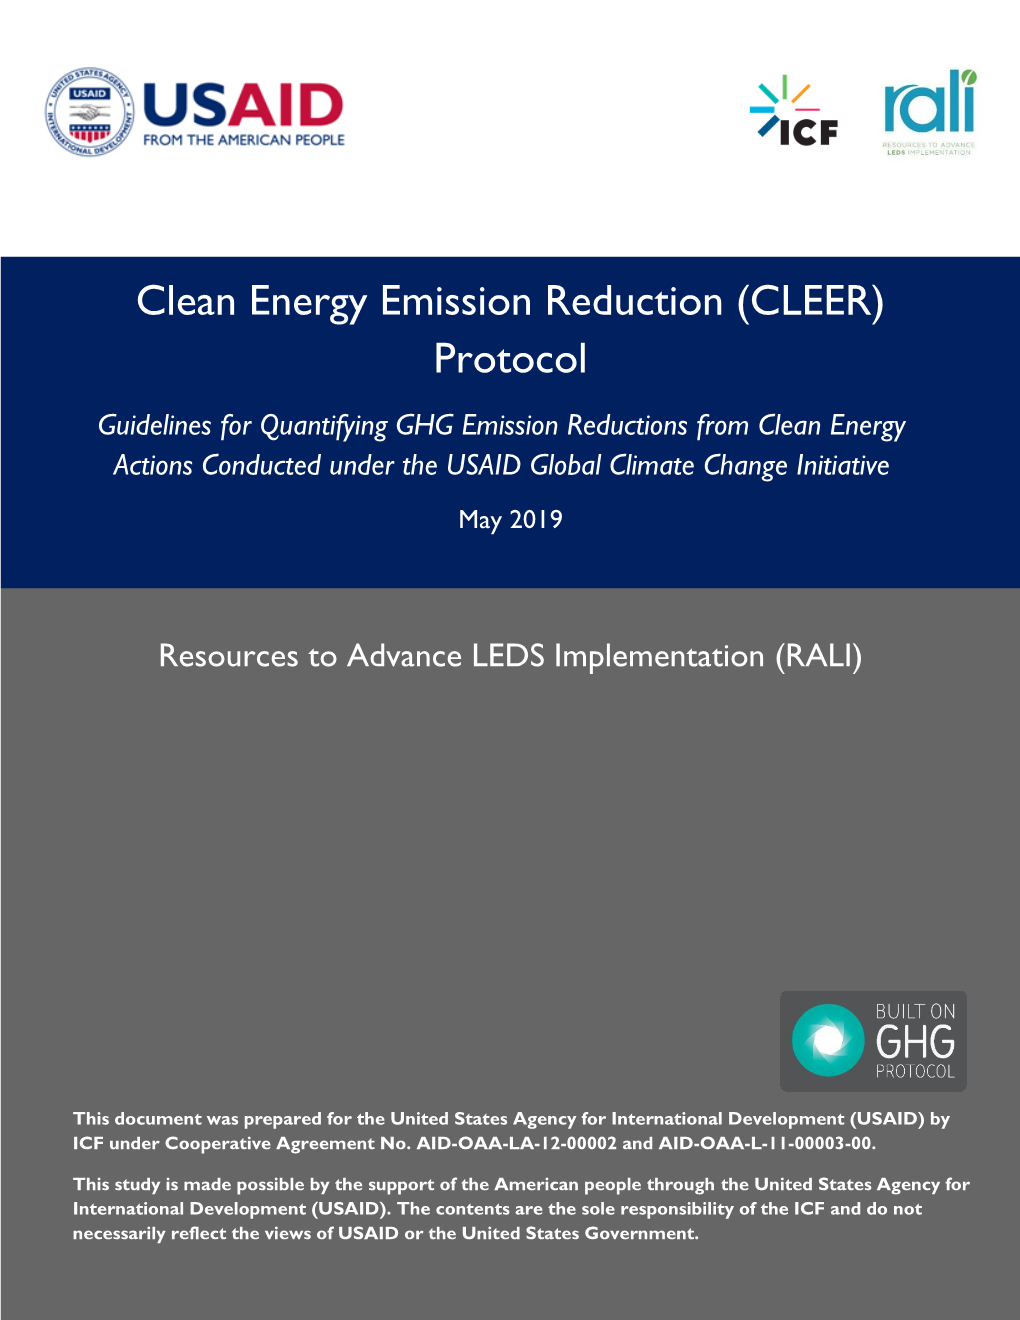 Clean Energy Emission Reduction (CLEER) Protocol